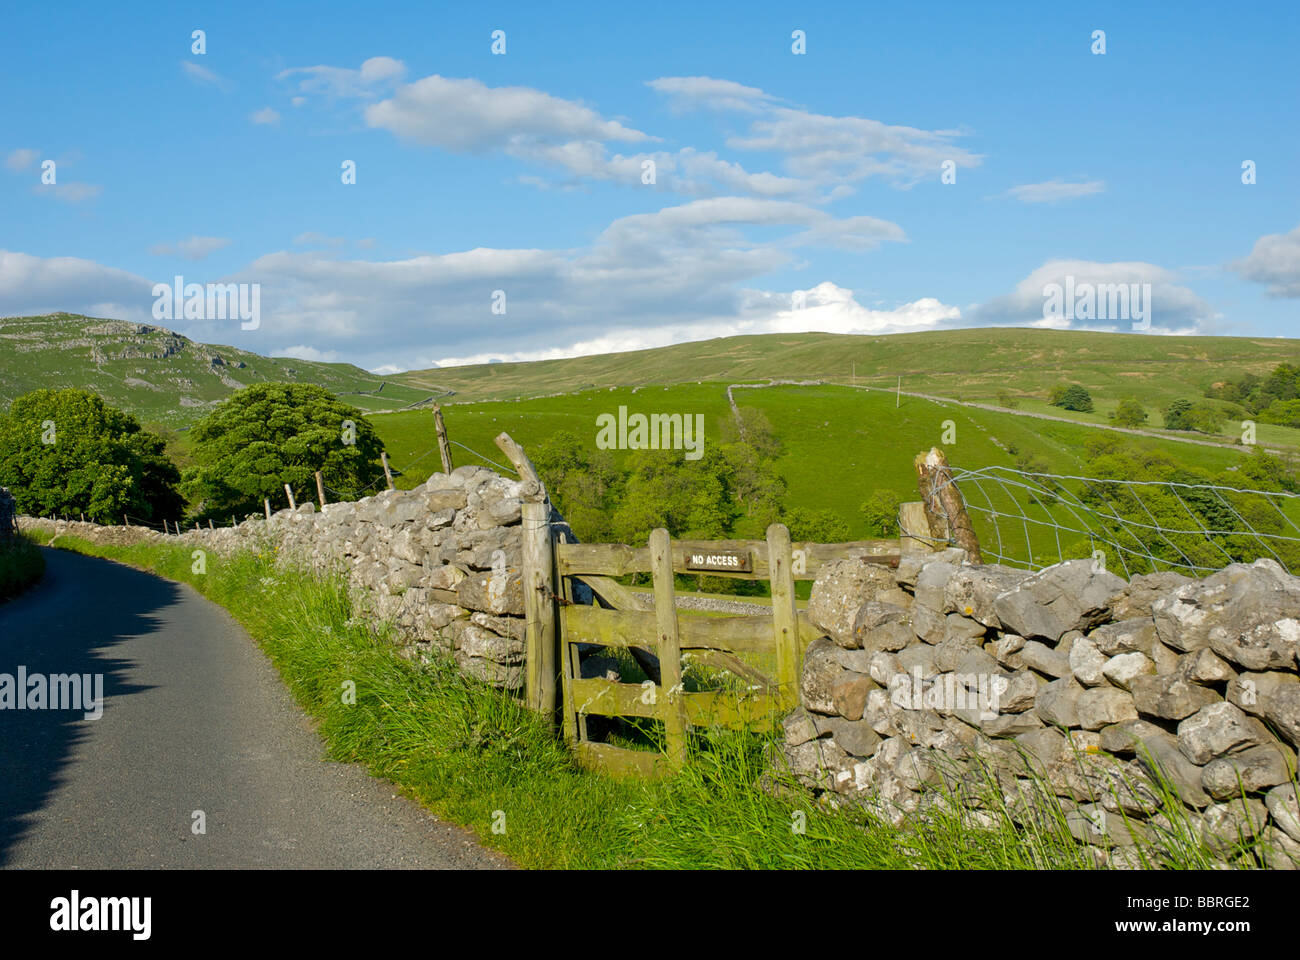 Narrow road near Malham, and gate with 'No Access' sign, Yorkshire Dales National Park, North Yorkshire UK Stock Photo